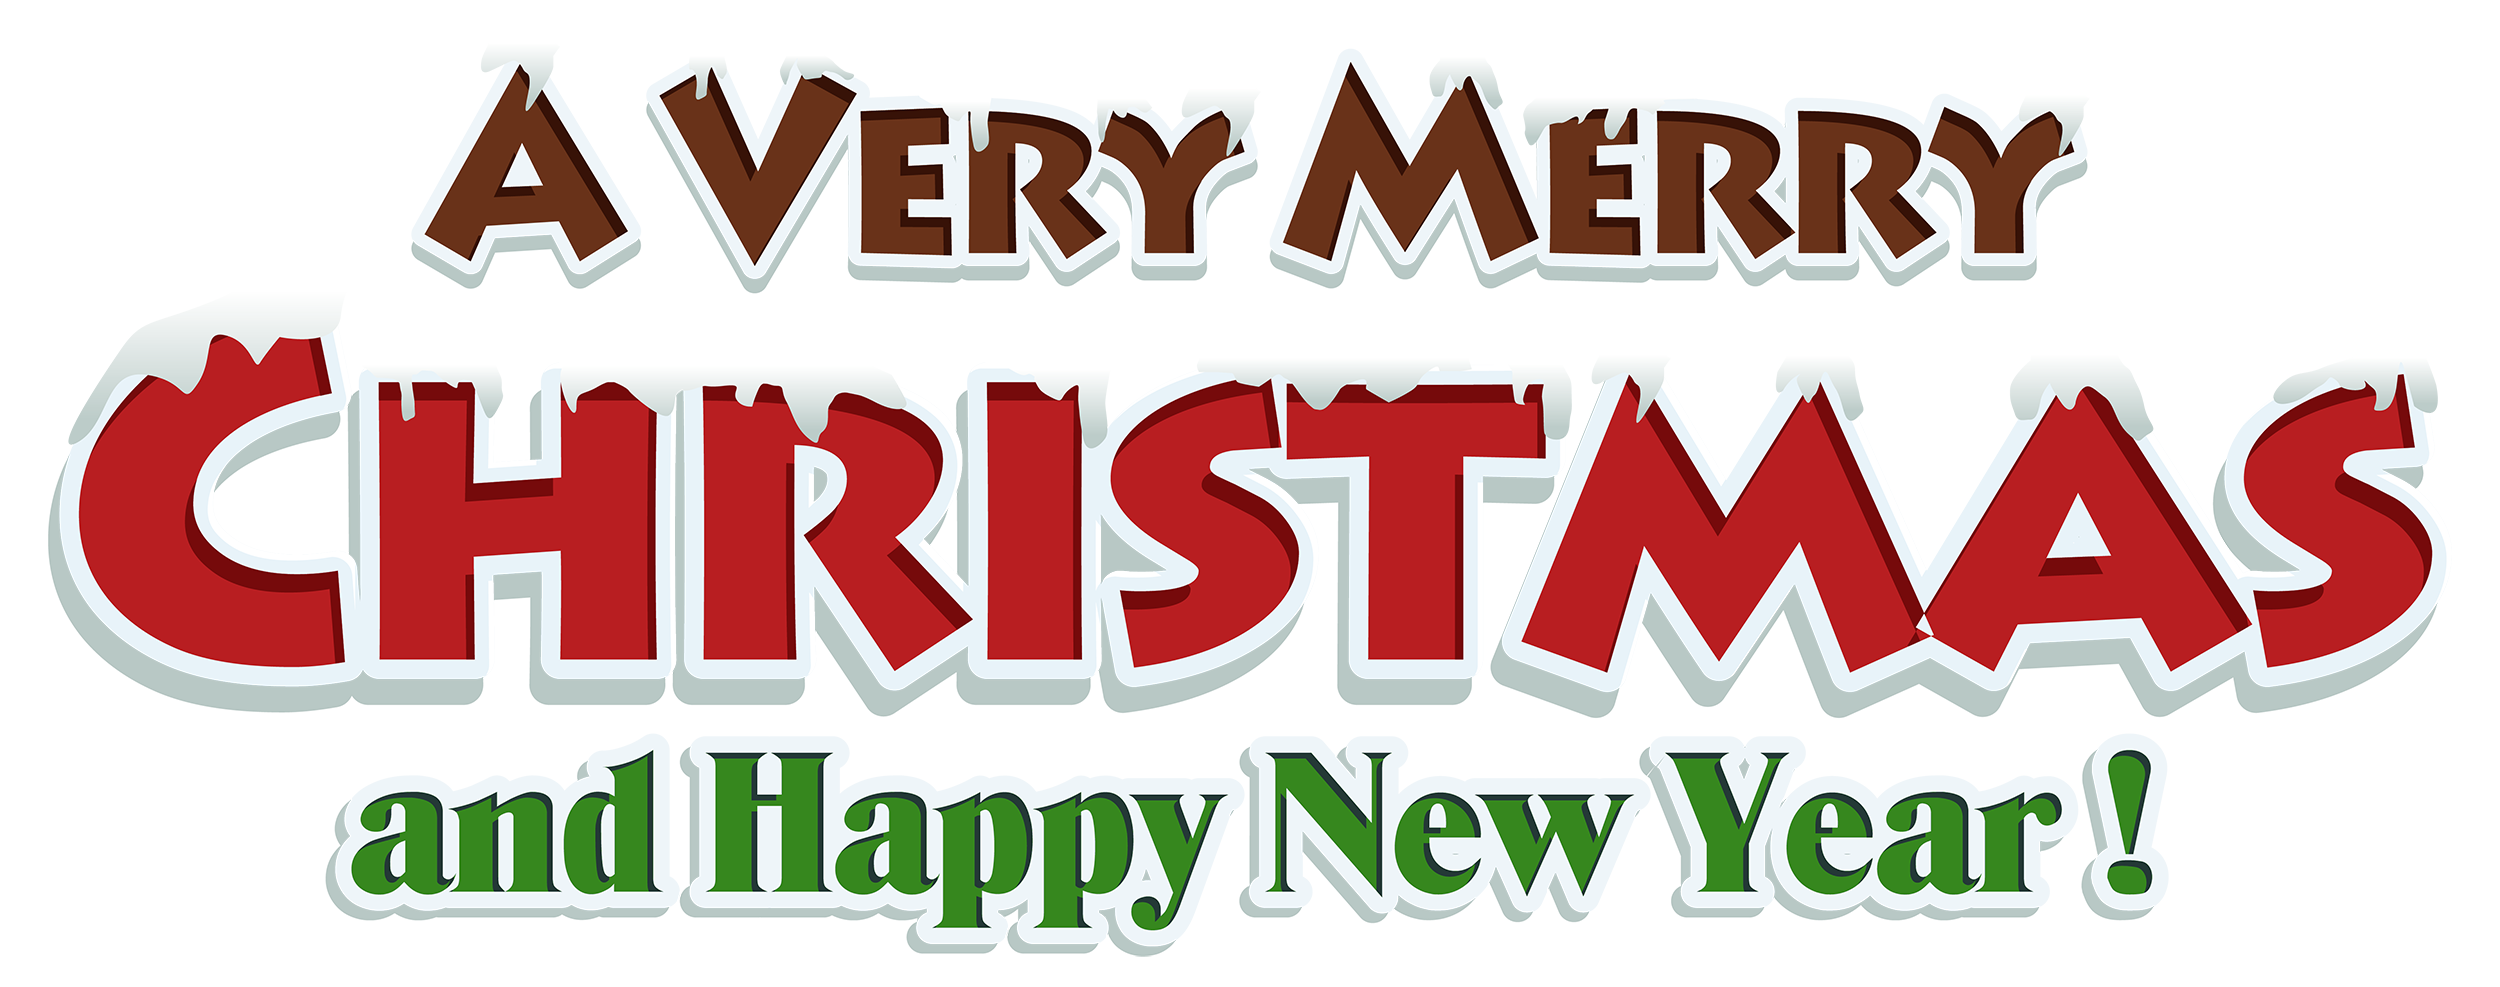 Merry christmas clip art background transparent images and ...